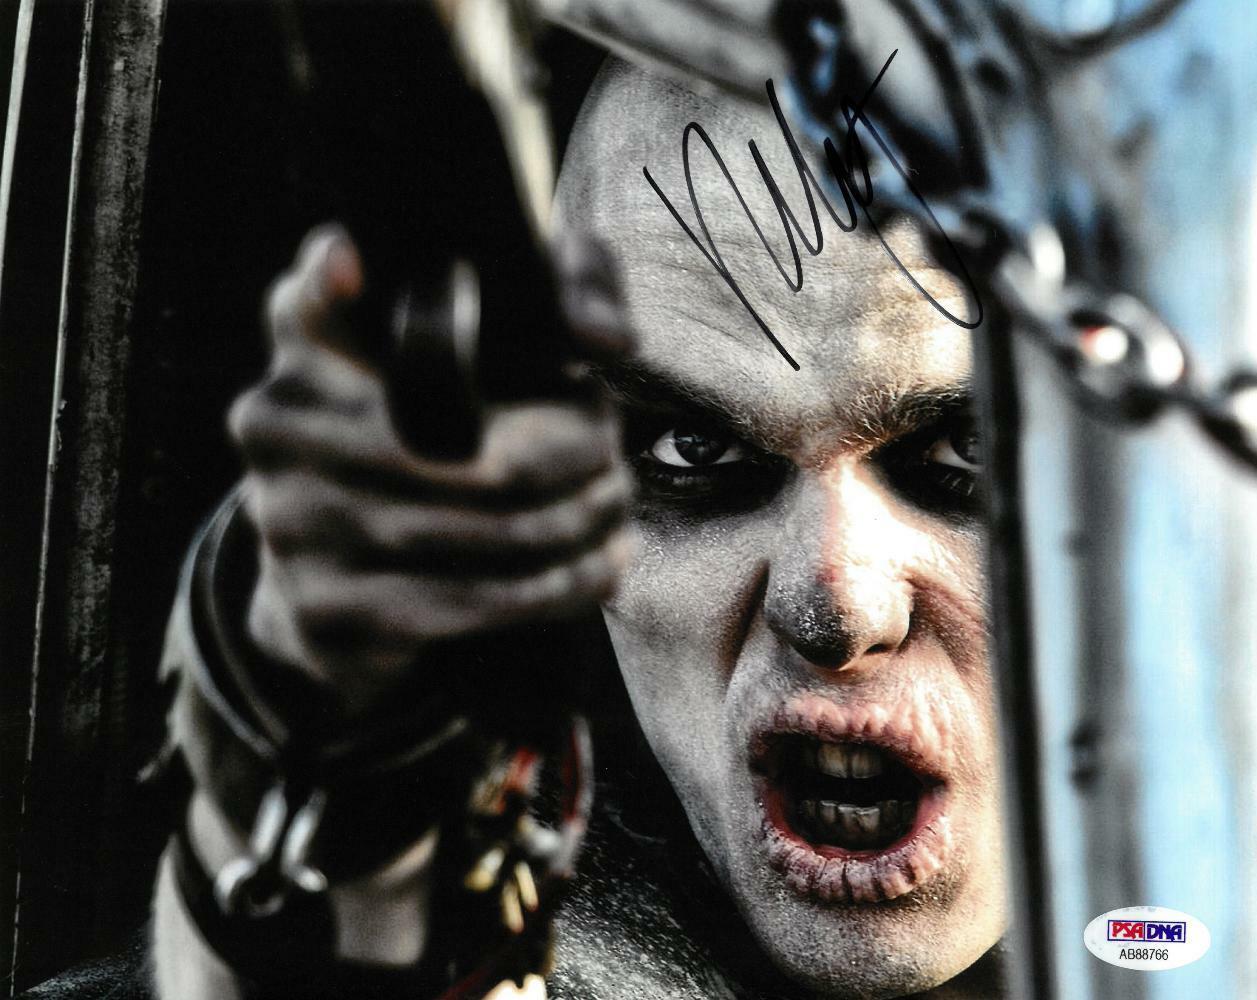 Nicholas Hoult Signed Mad Max Authentic Autographed 8x10 Photo Poster painting PSA/DNA #AB88766